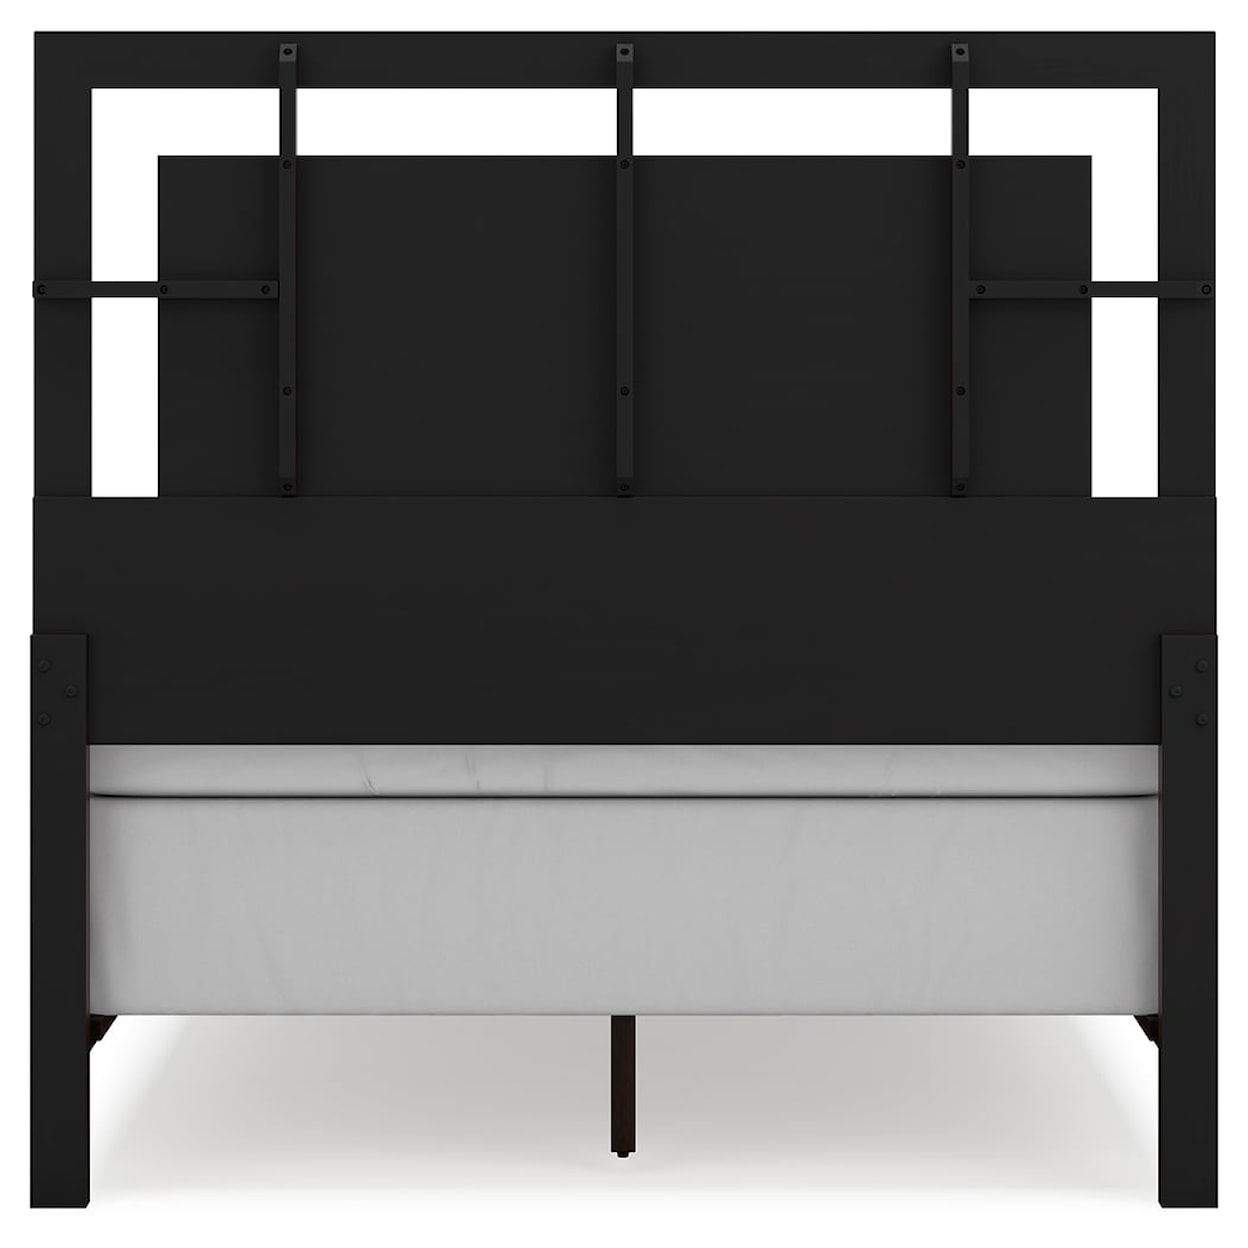 Signature Design by Ashley Covetown Full Panel Bed